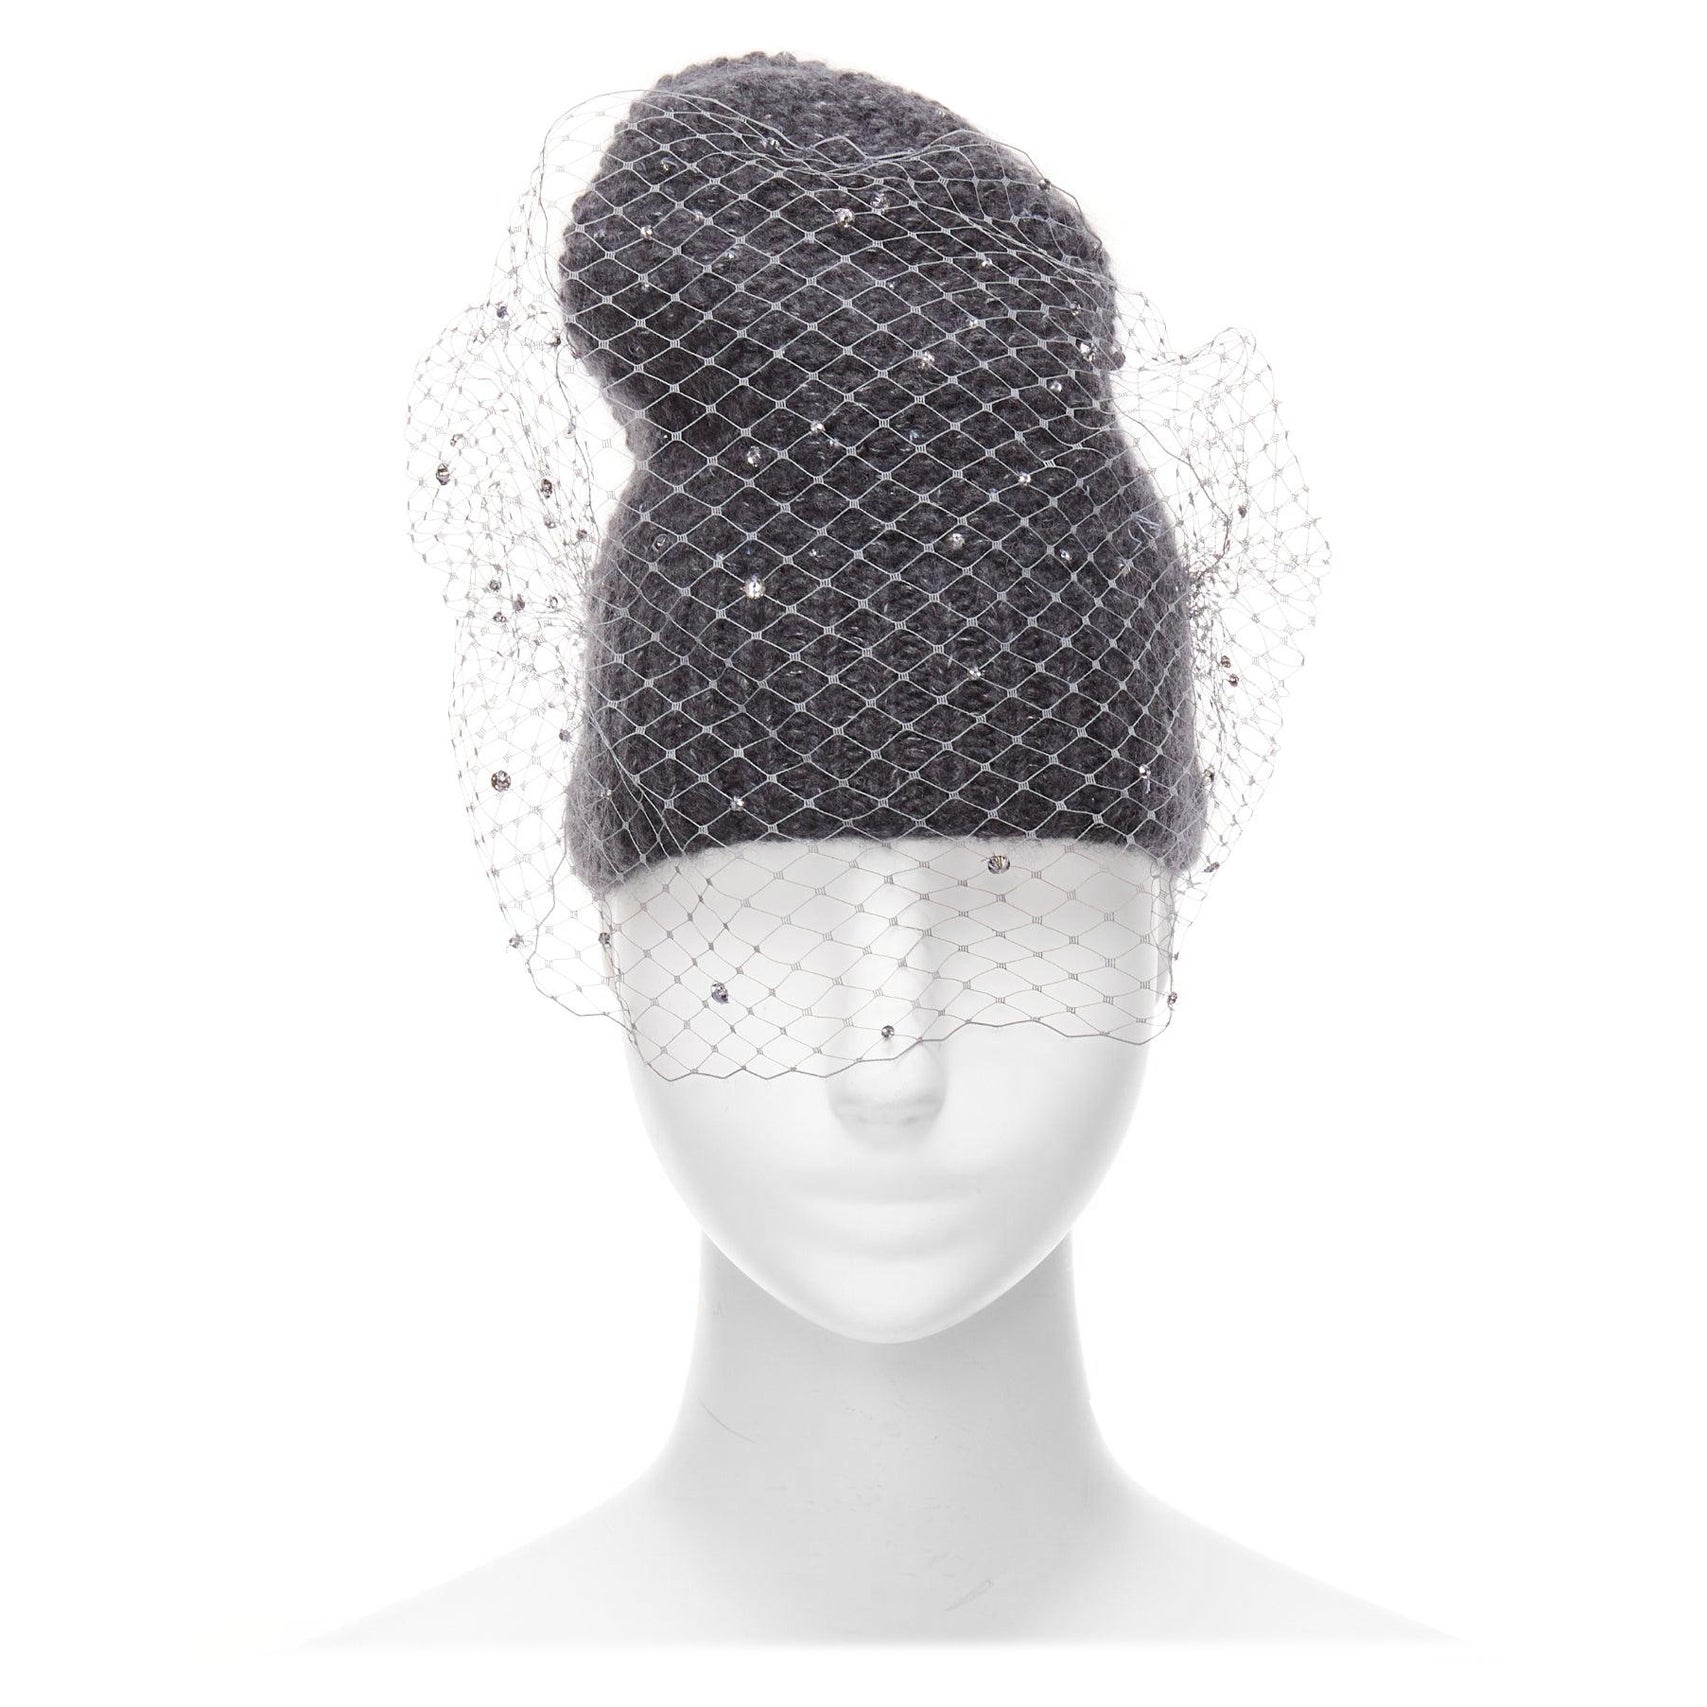 JENNIFER BEHR grey charcoal crystal beads veil round top beanie hat For Sale